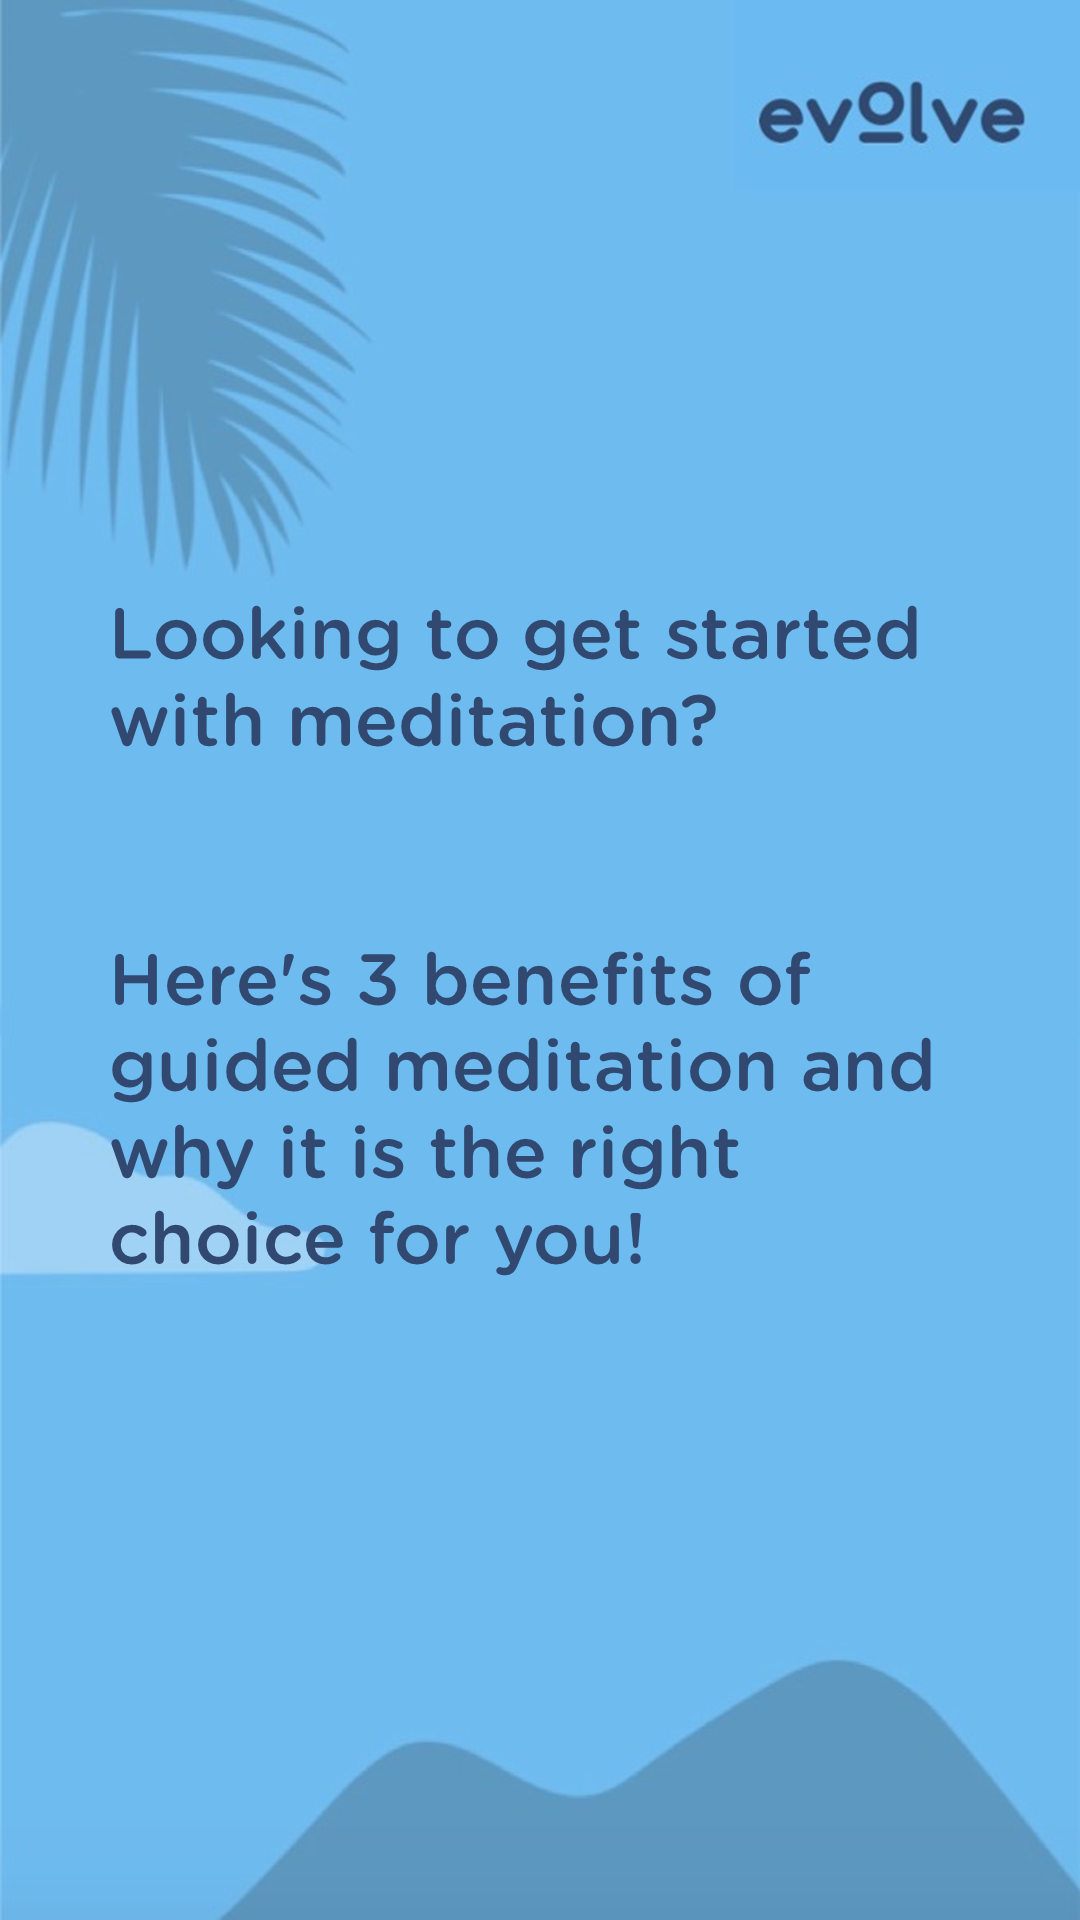 The Benefits Of Guided Meditation | Evolve